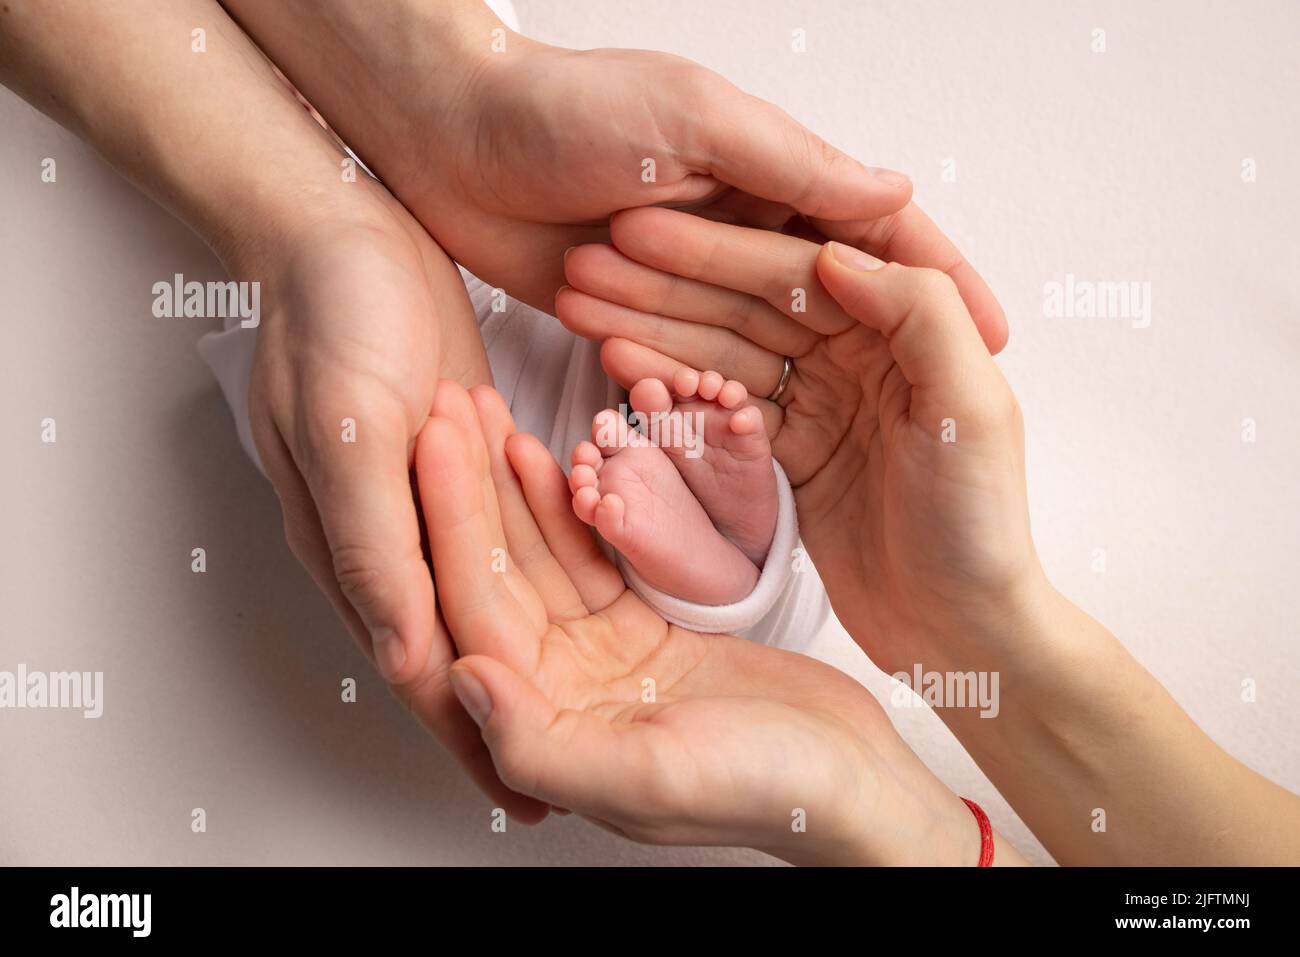 https://c8.alamy.com/comp/2JFTMNJ/the-palms-of-the-father-the-mother-are-holding-the-foot-of-the-newborn-baby-feet-on-the-palms-of-the-parents-2JFTMNJ.jpg